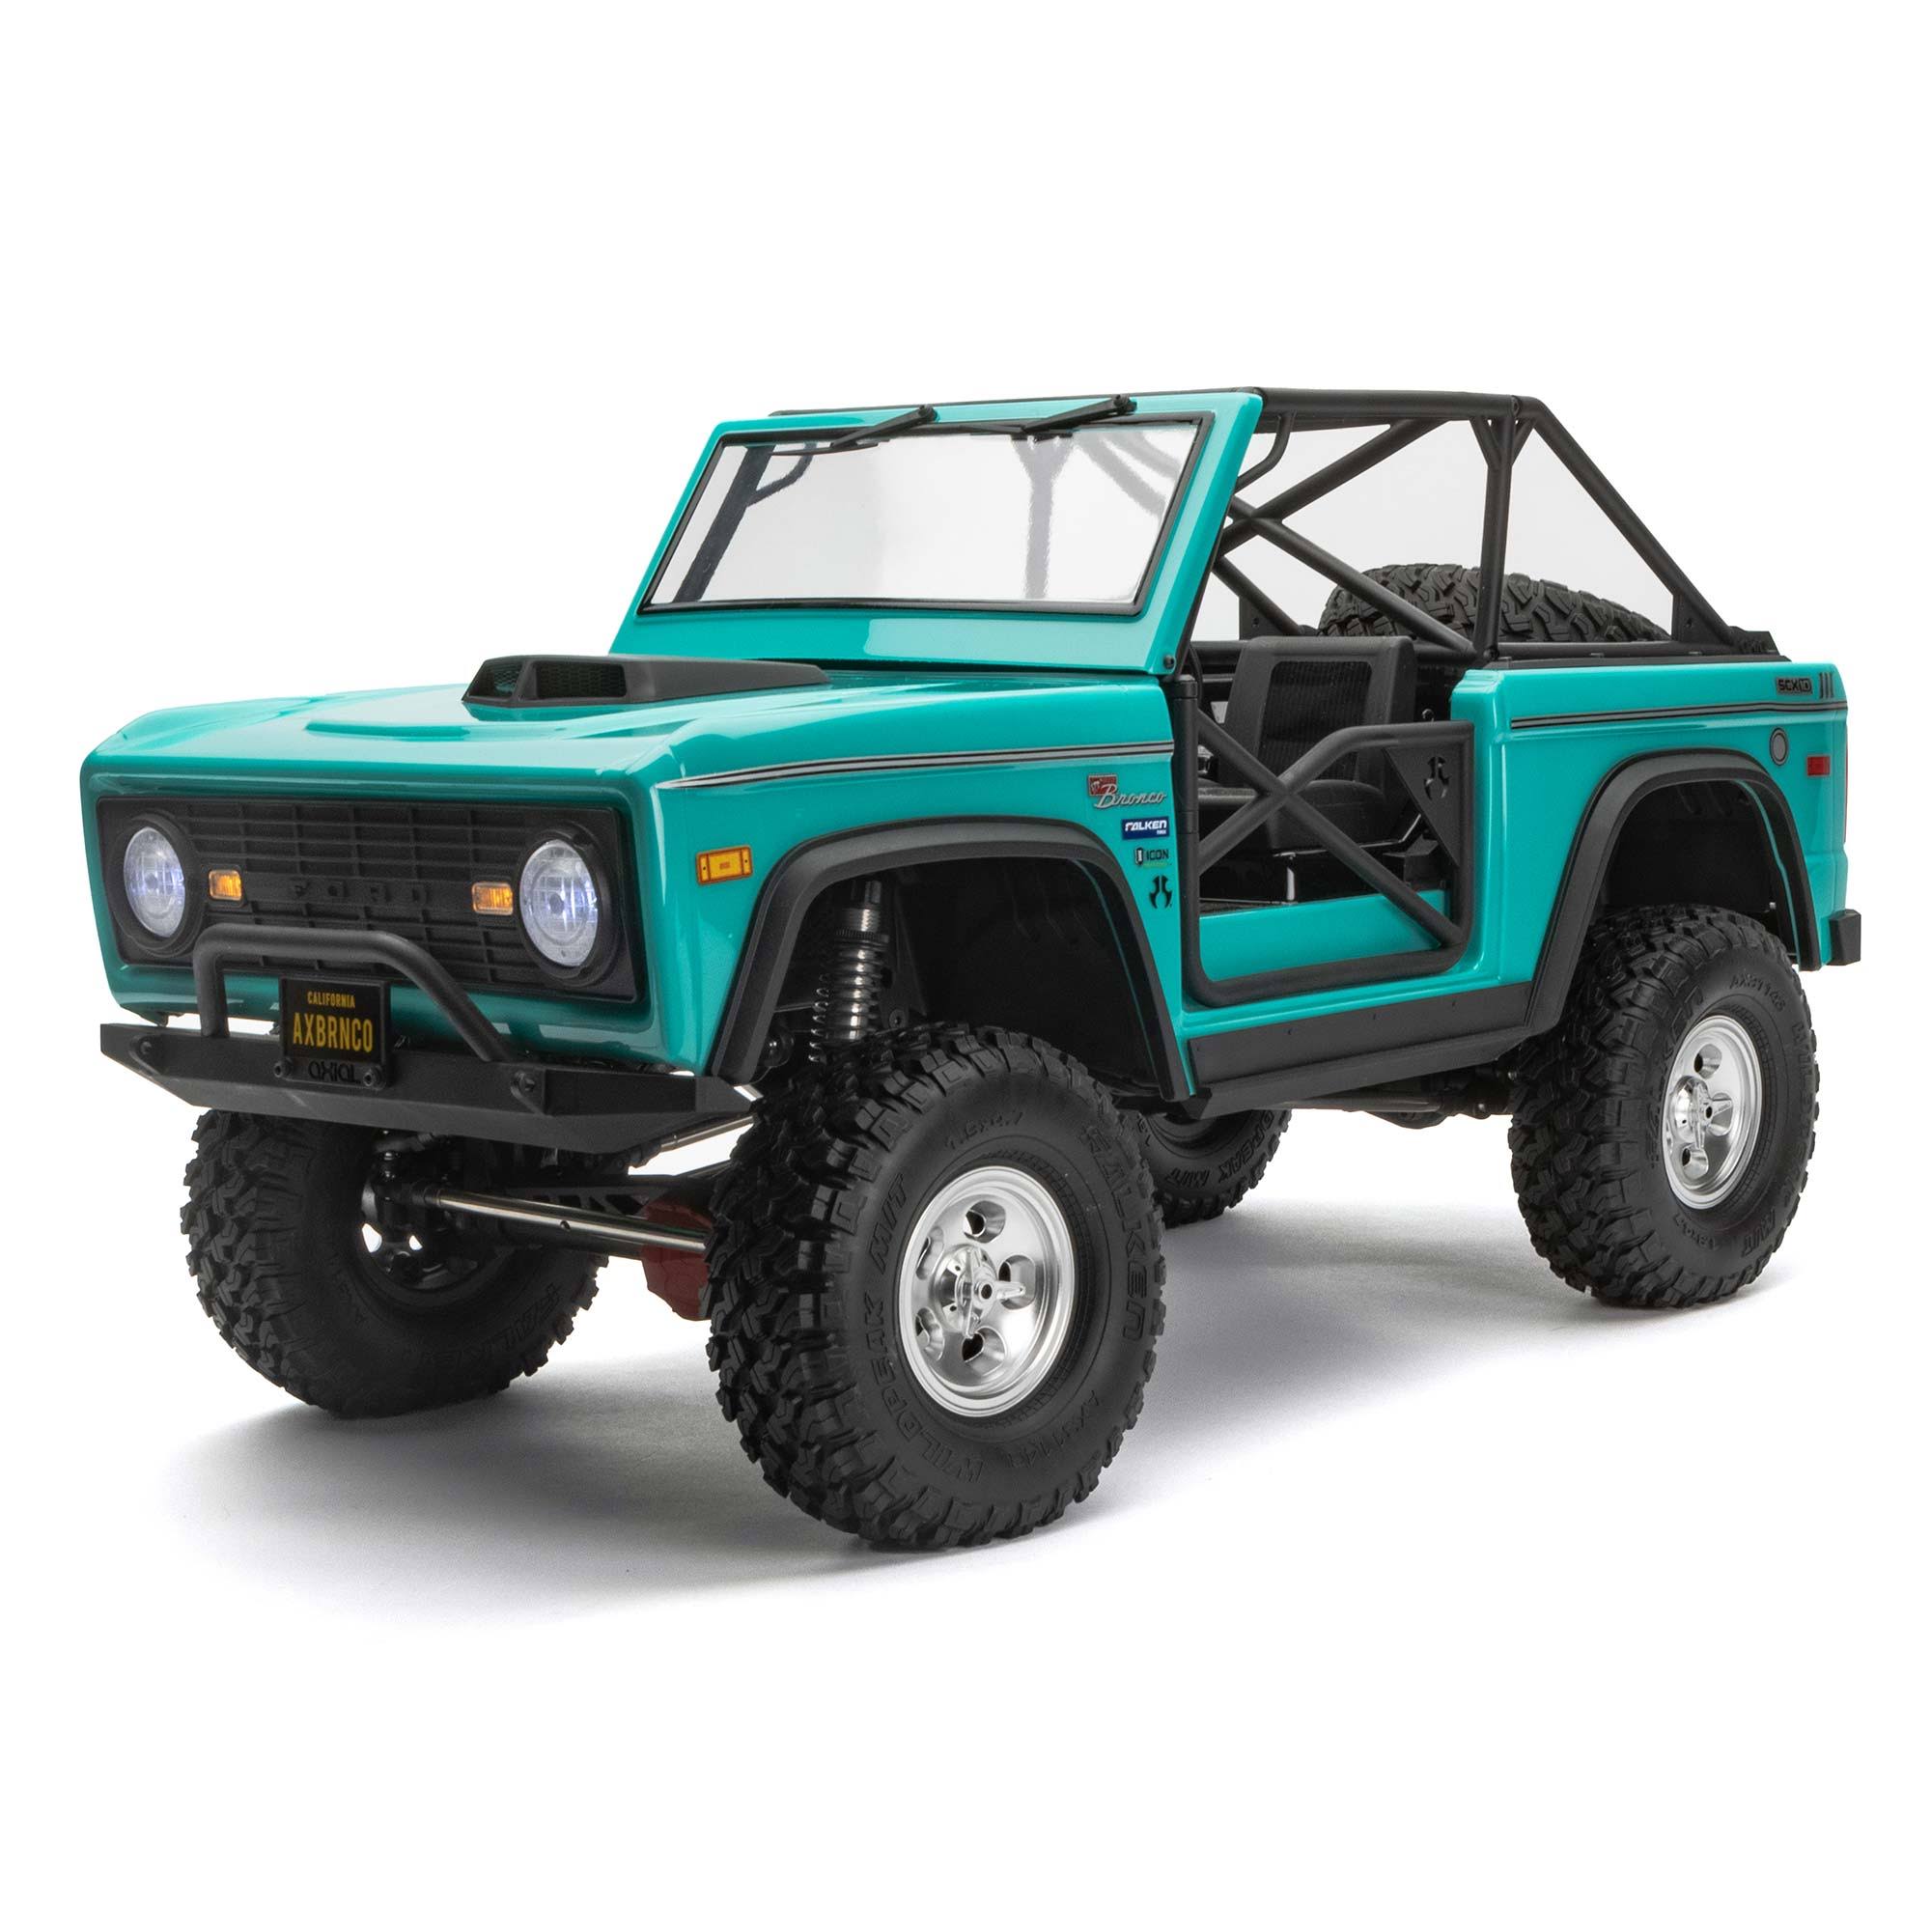 Axial 1/10 Scx10 III Early Ford Bronco 4WD RTR, Turquoise Blue